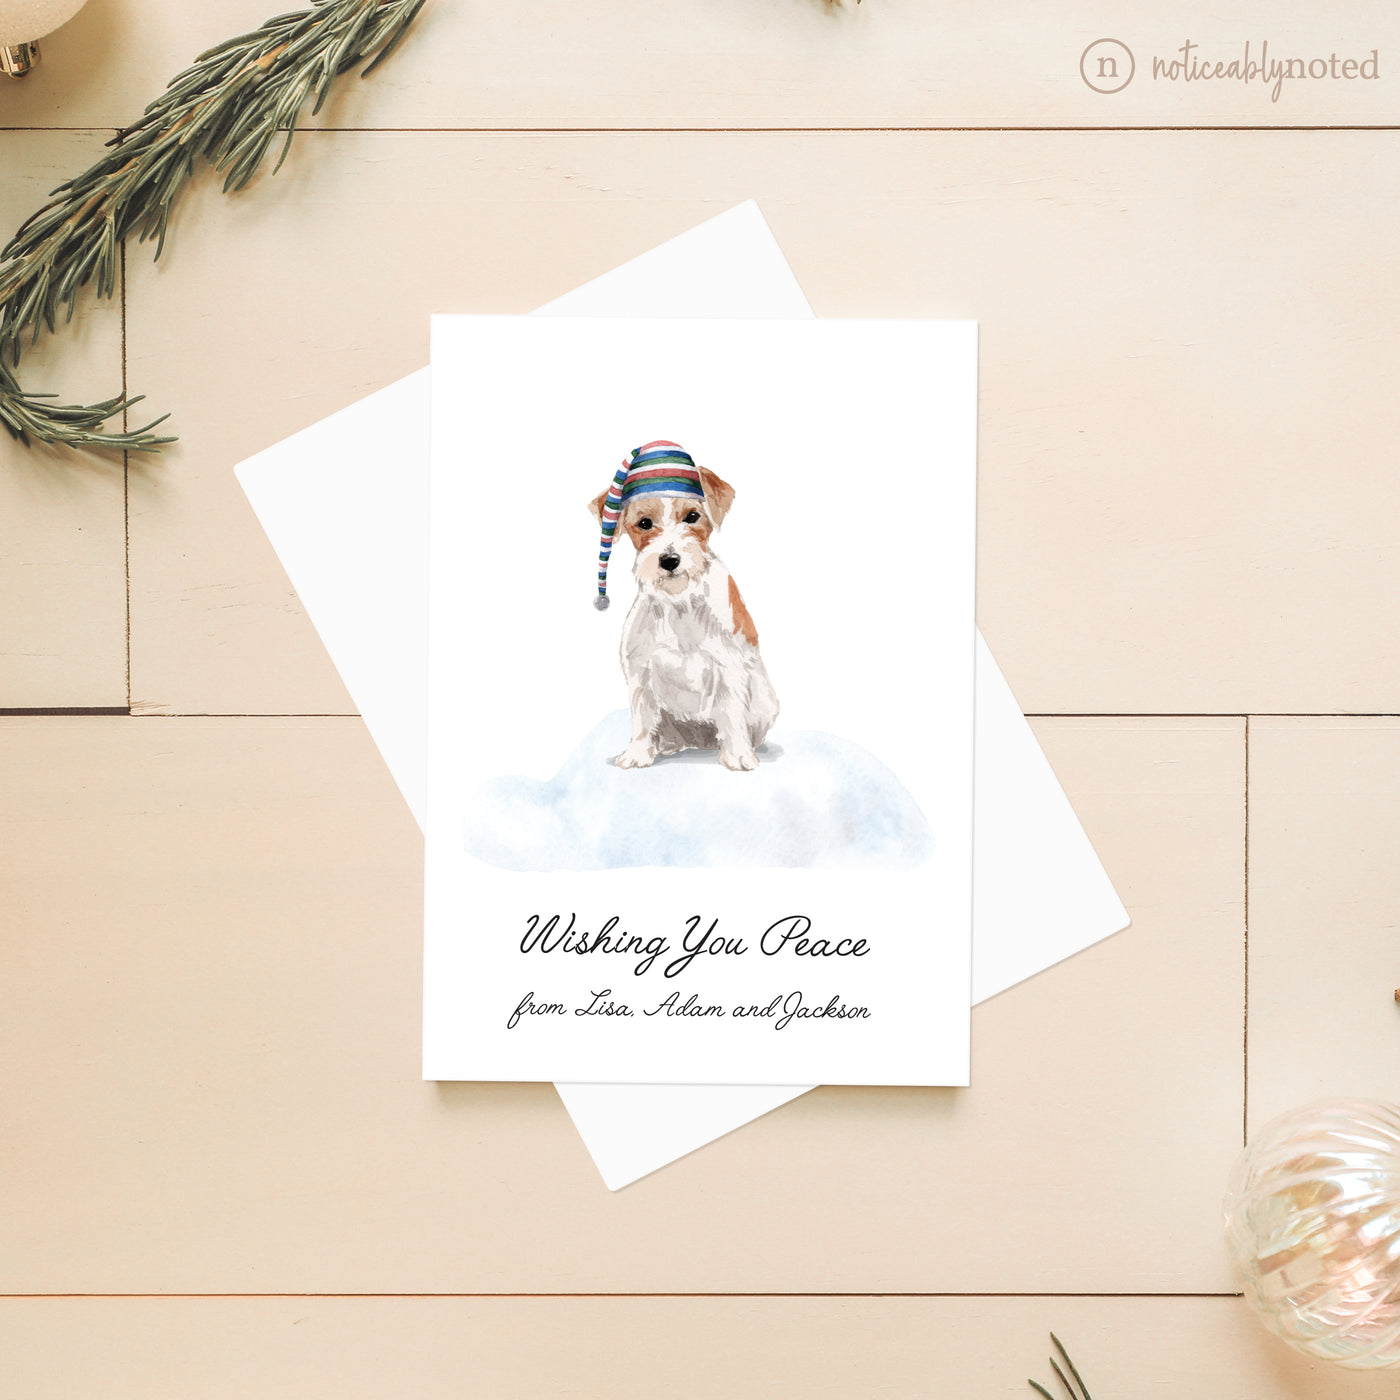 Jack Russell Dog Christmas Card | Noticeably Noted